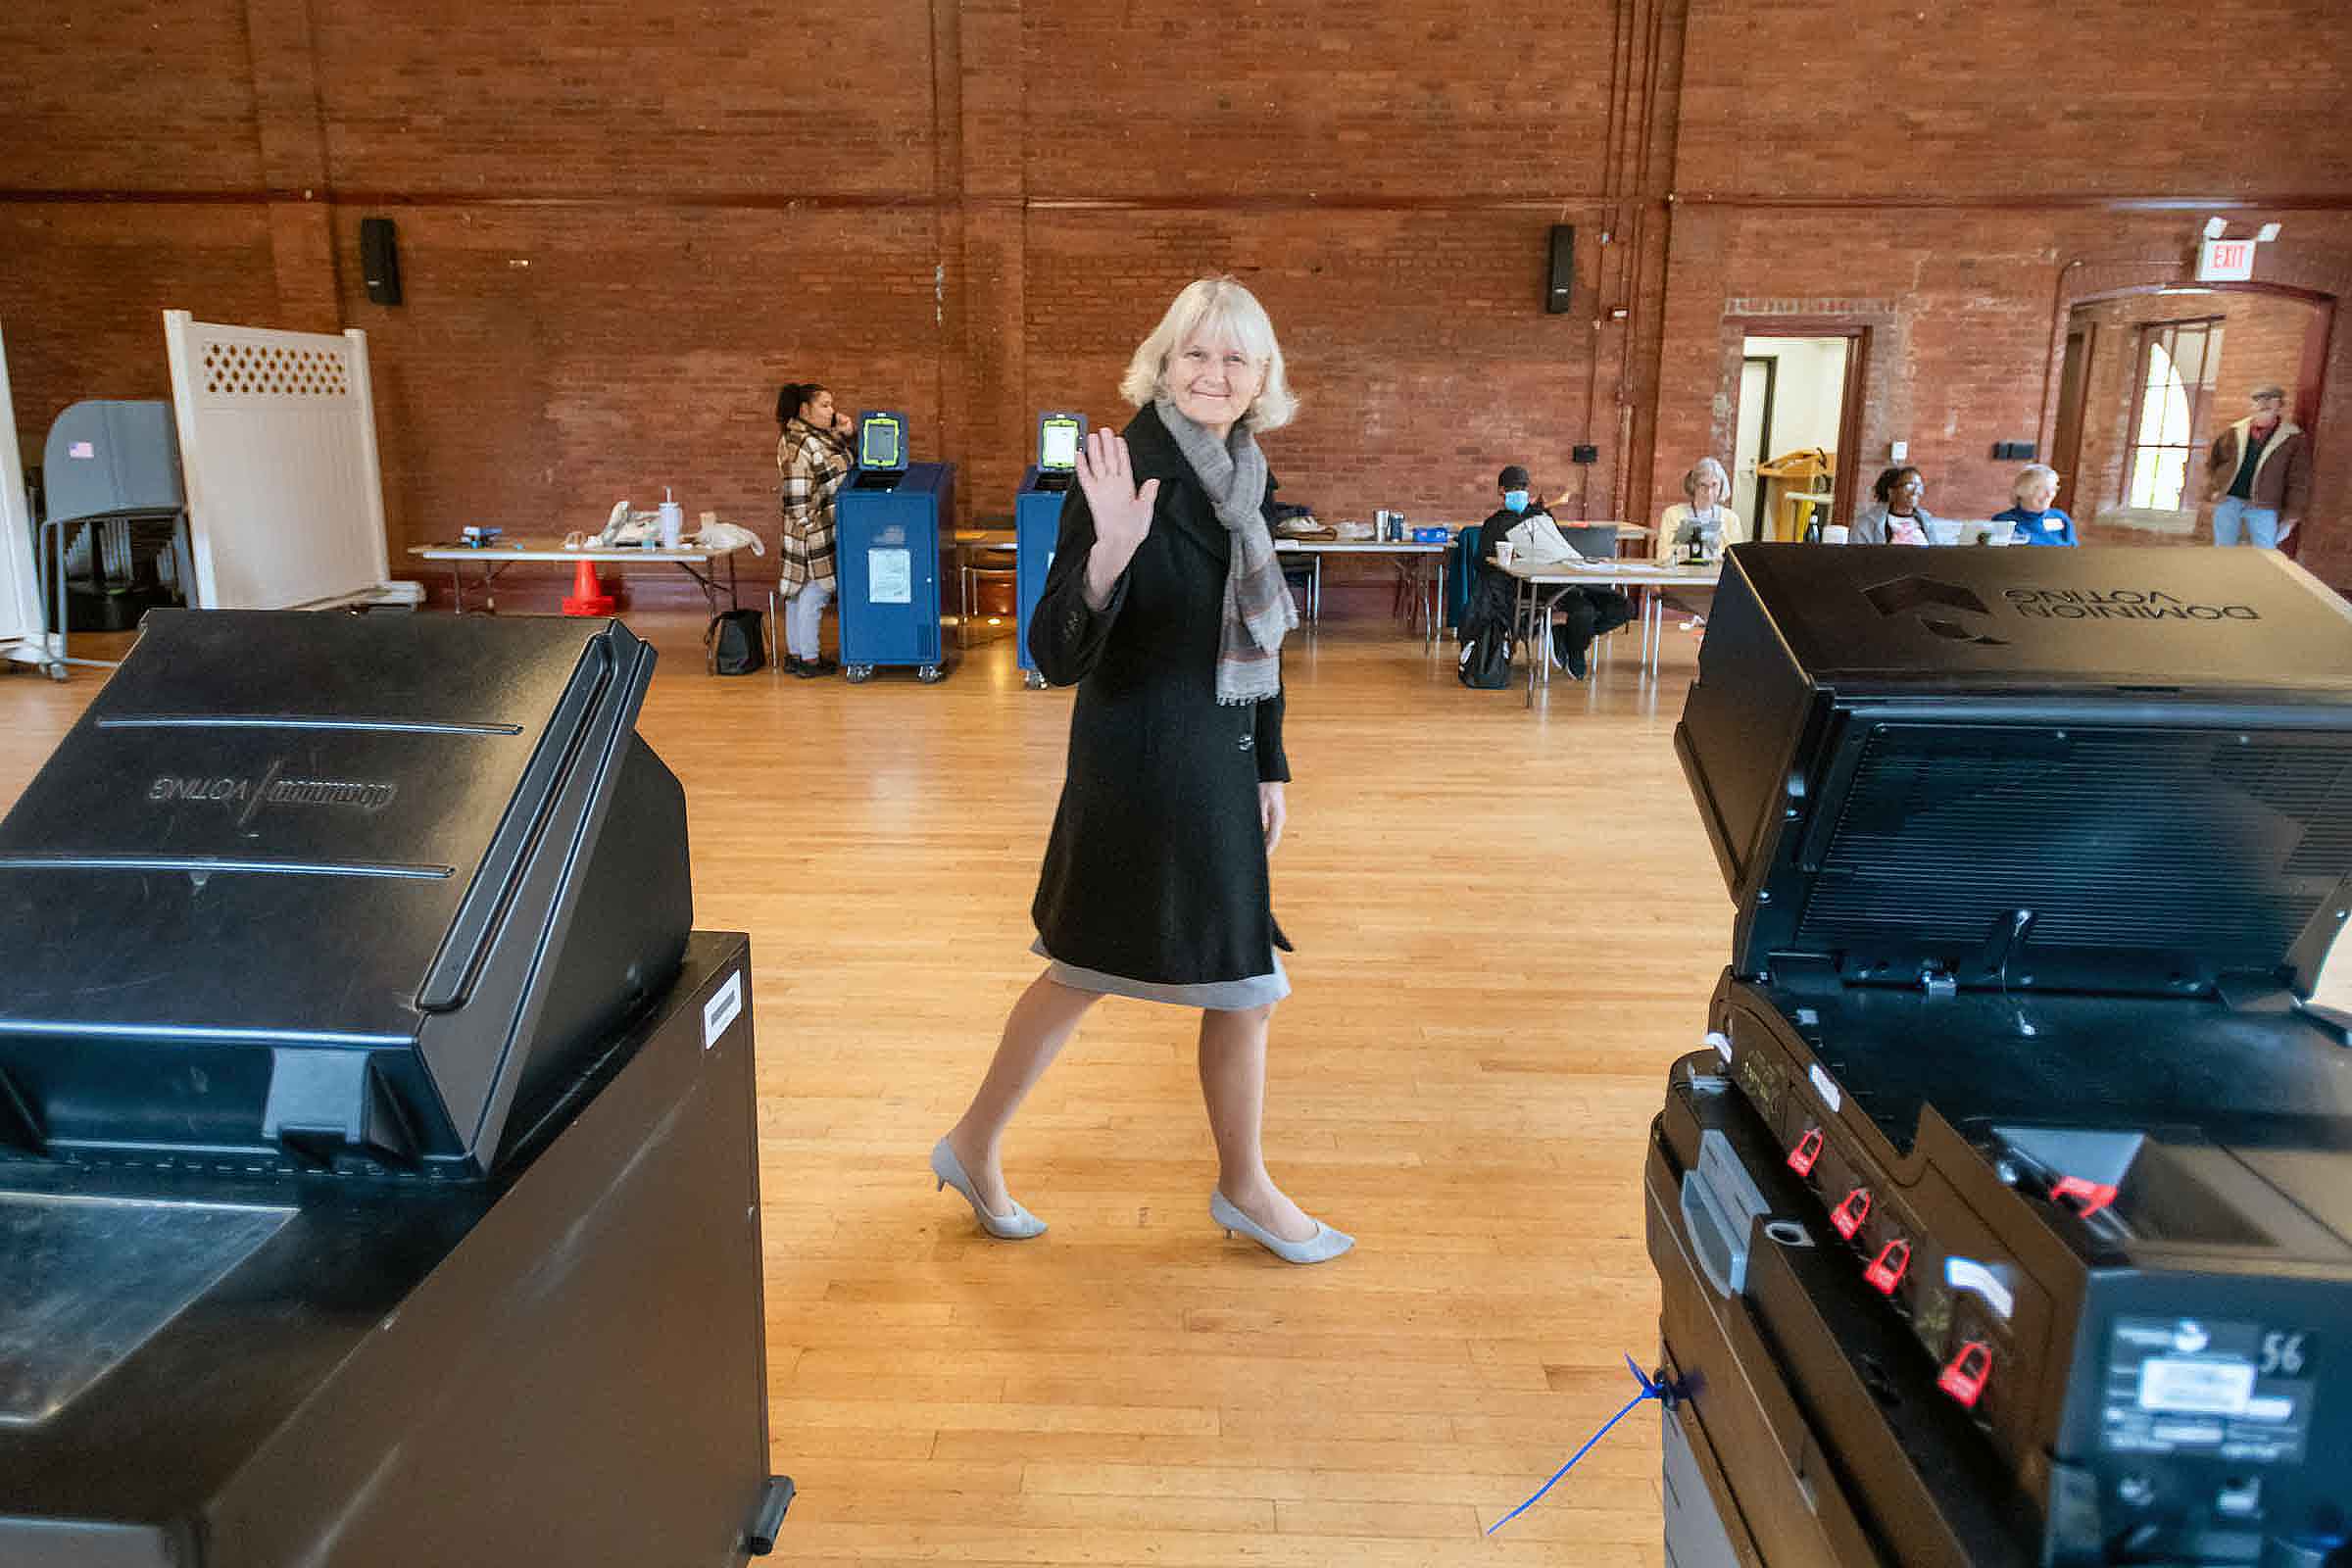 A person walking and waving to the camera at a polling site.